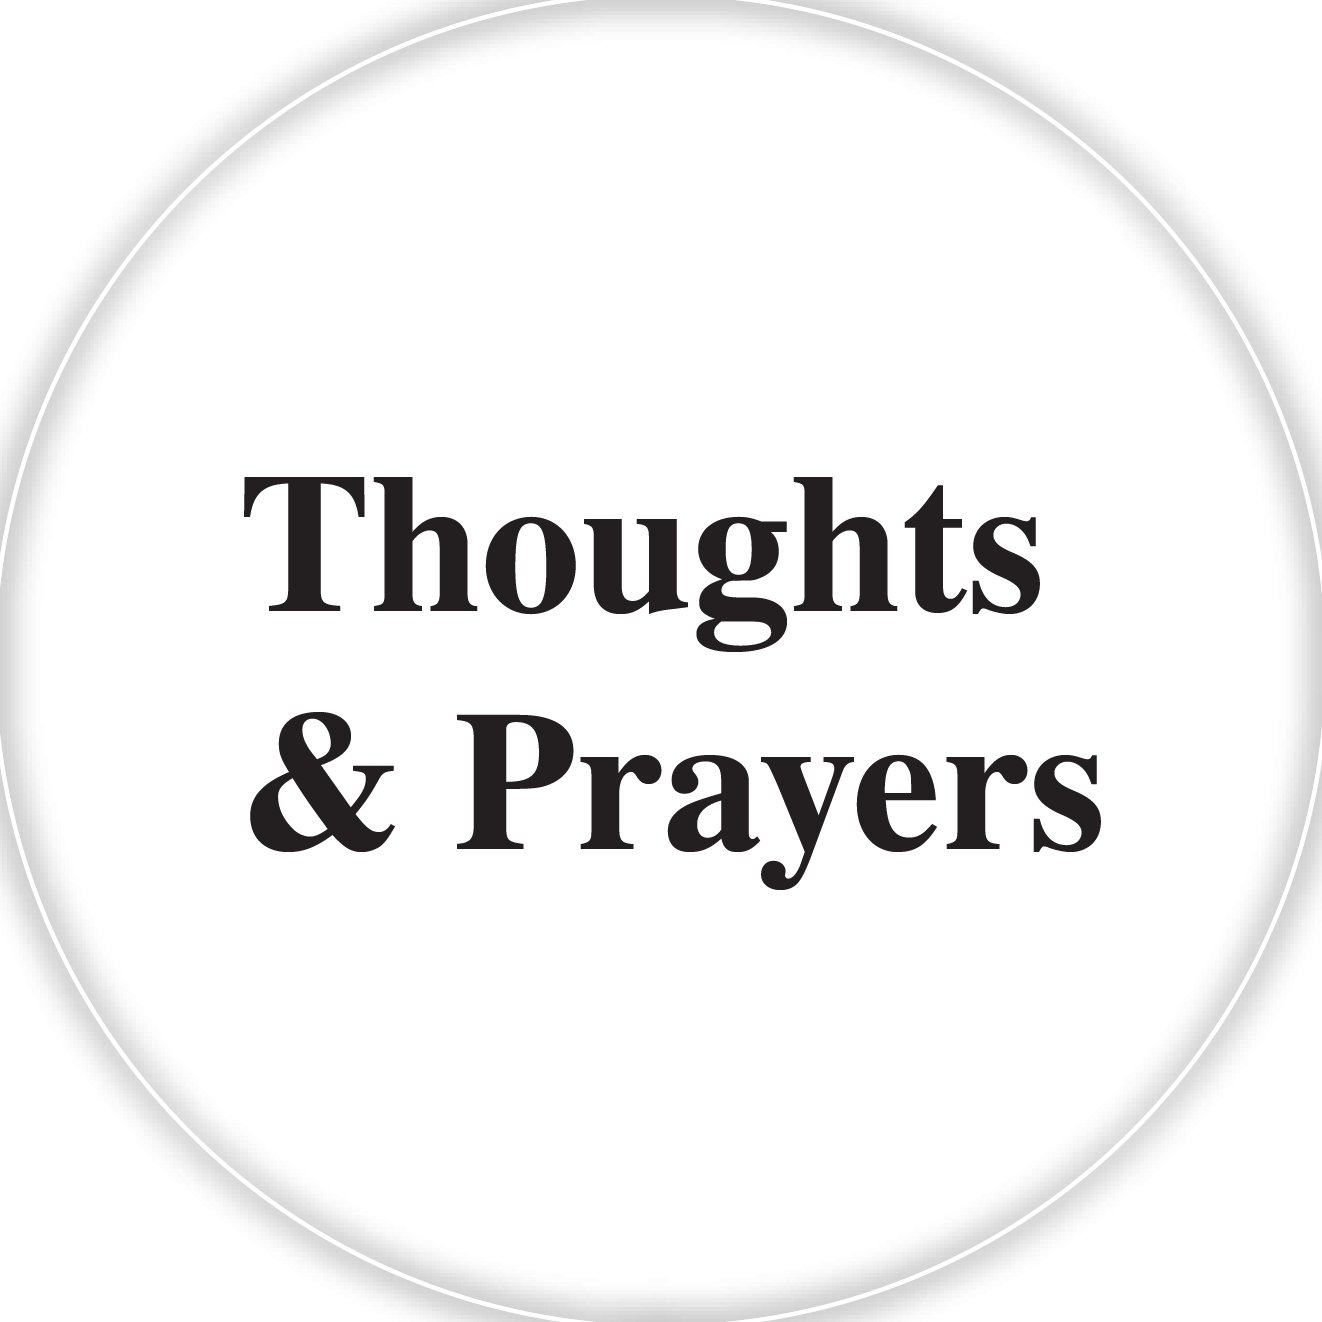 What's as good as thoughts and prayers?